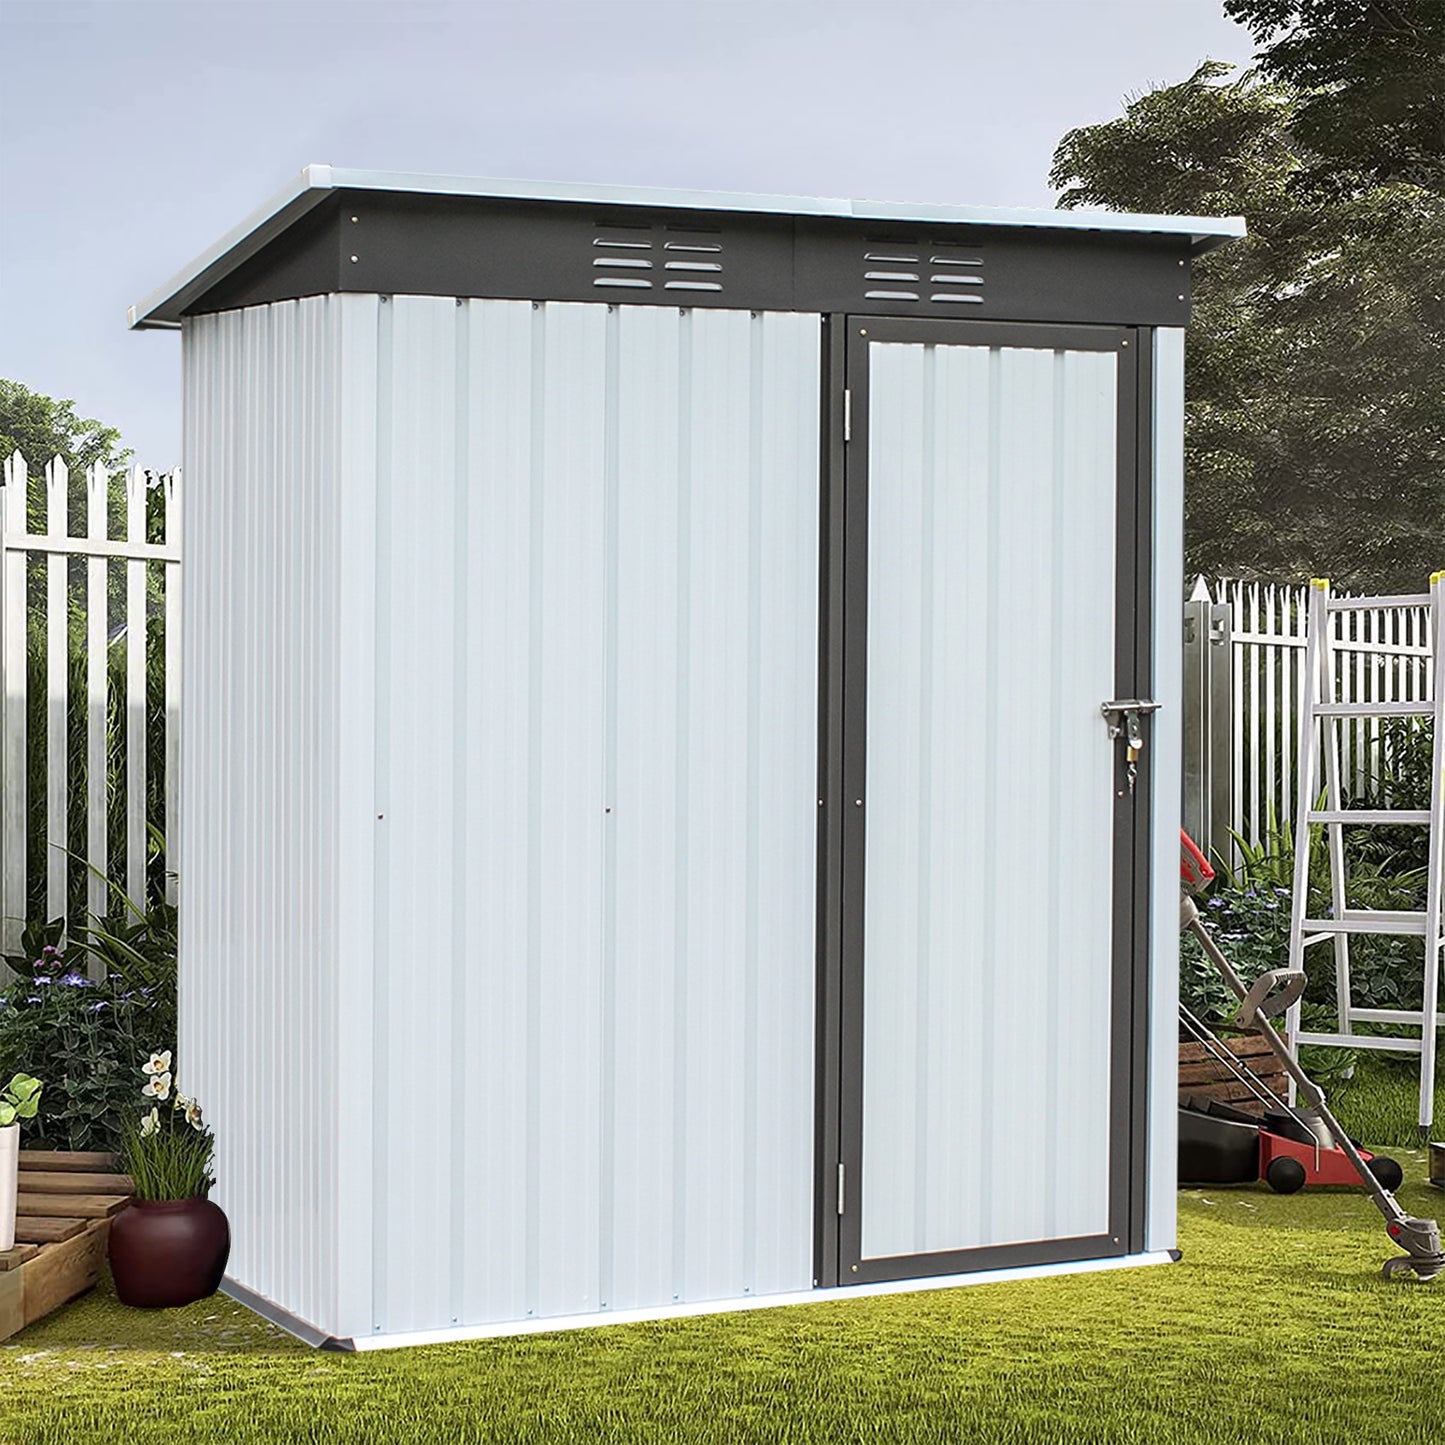 Outdoor Shed Storage Cabinet, 5FT X 3FT Garden Storage Shed Metal with Lockable Doors, Outside Vertical Shed for Patio Lawn Backyard Trash Cans Pet, LJ3915